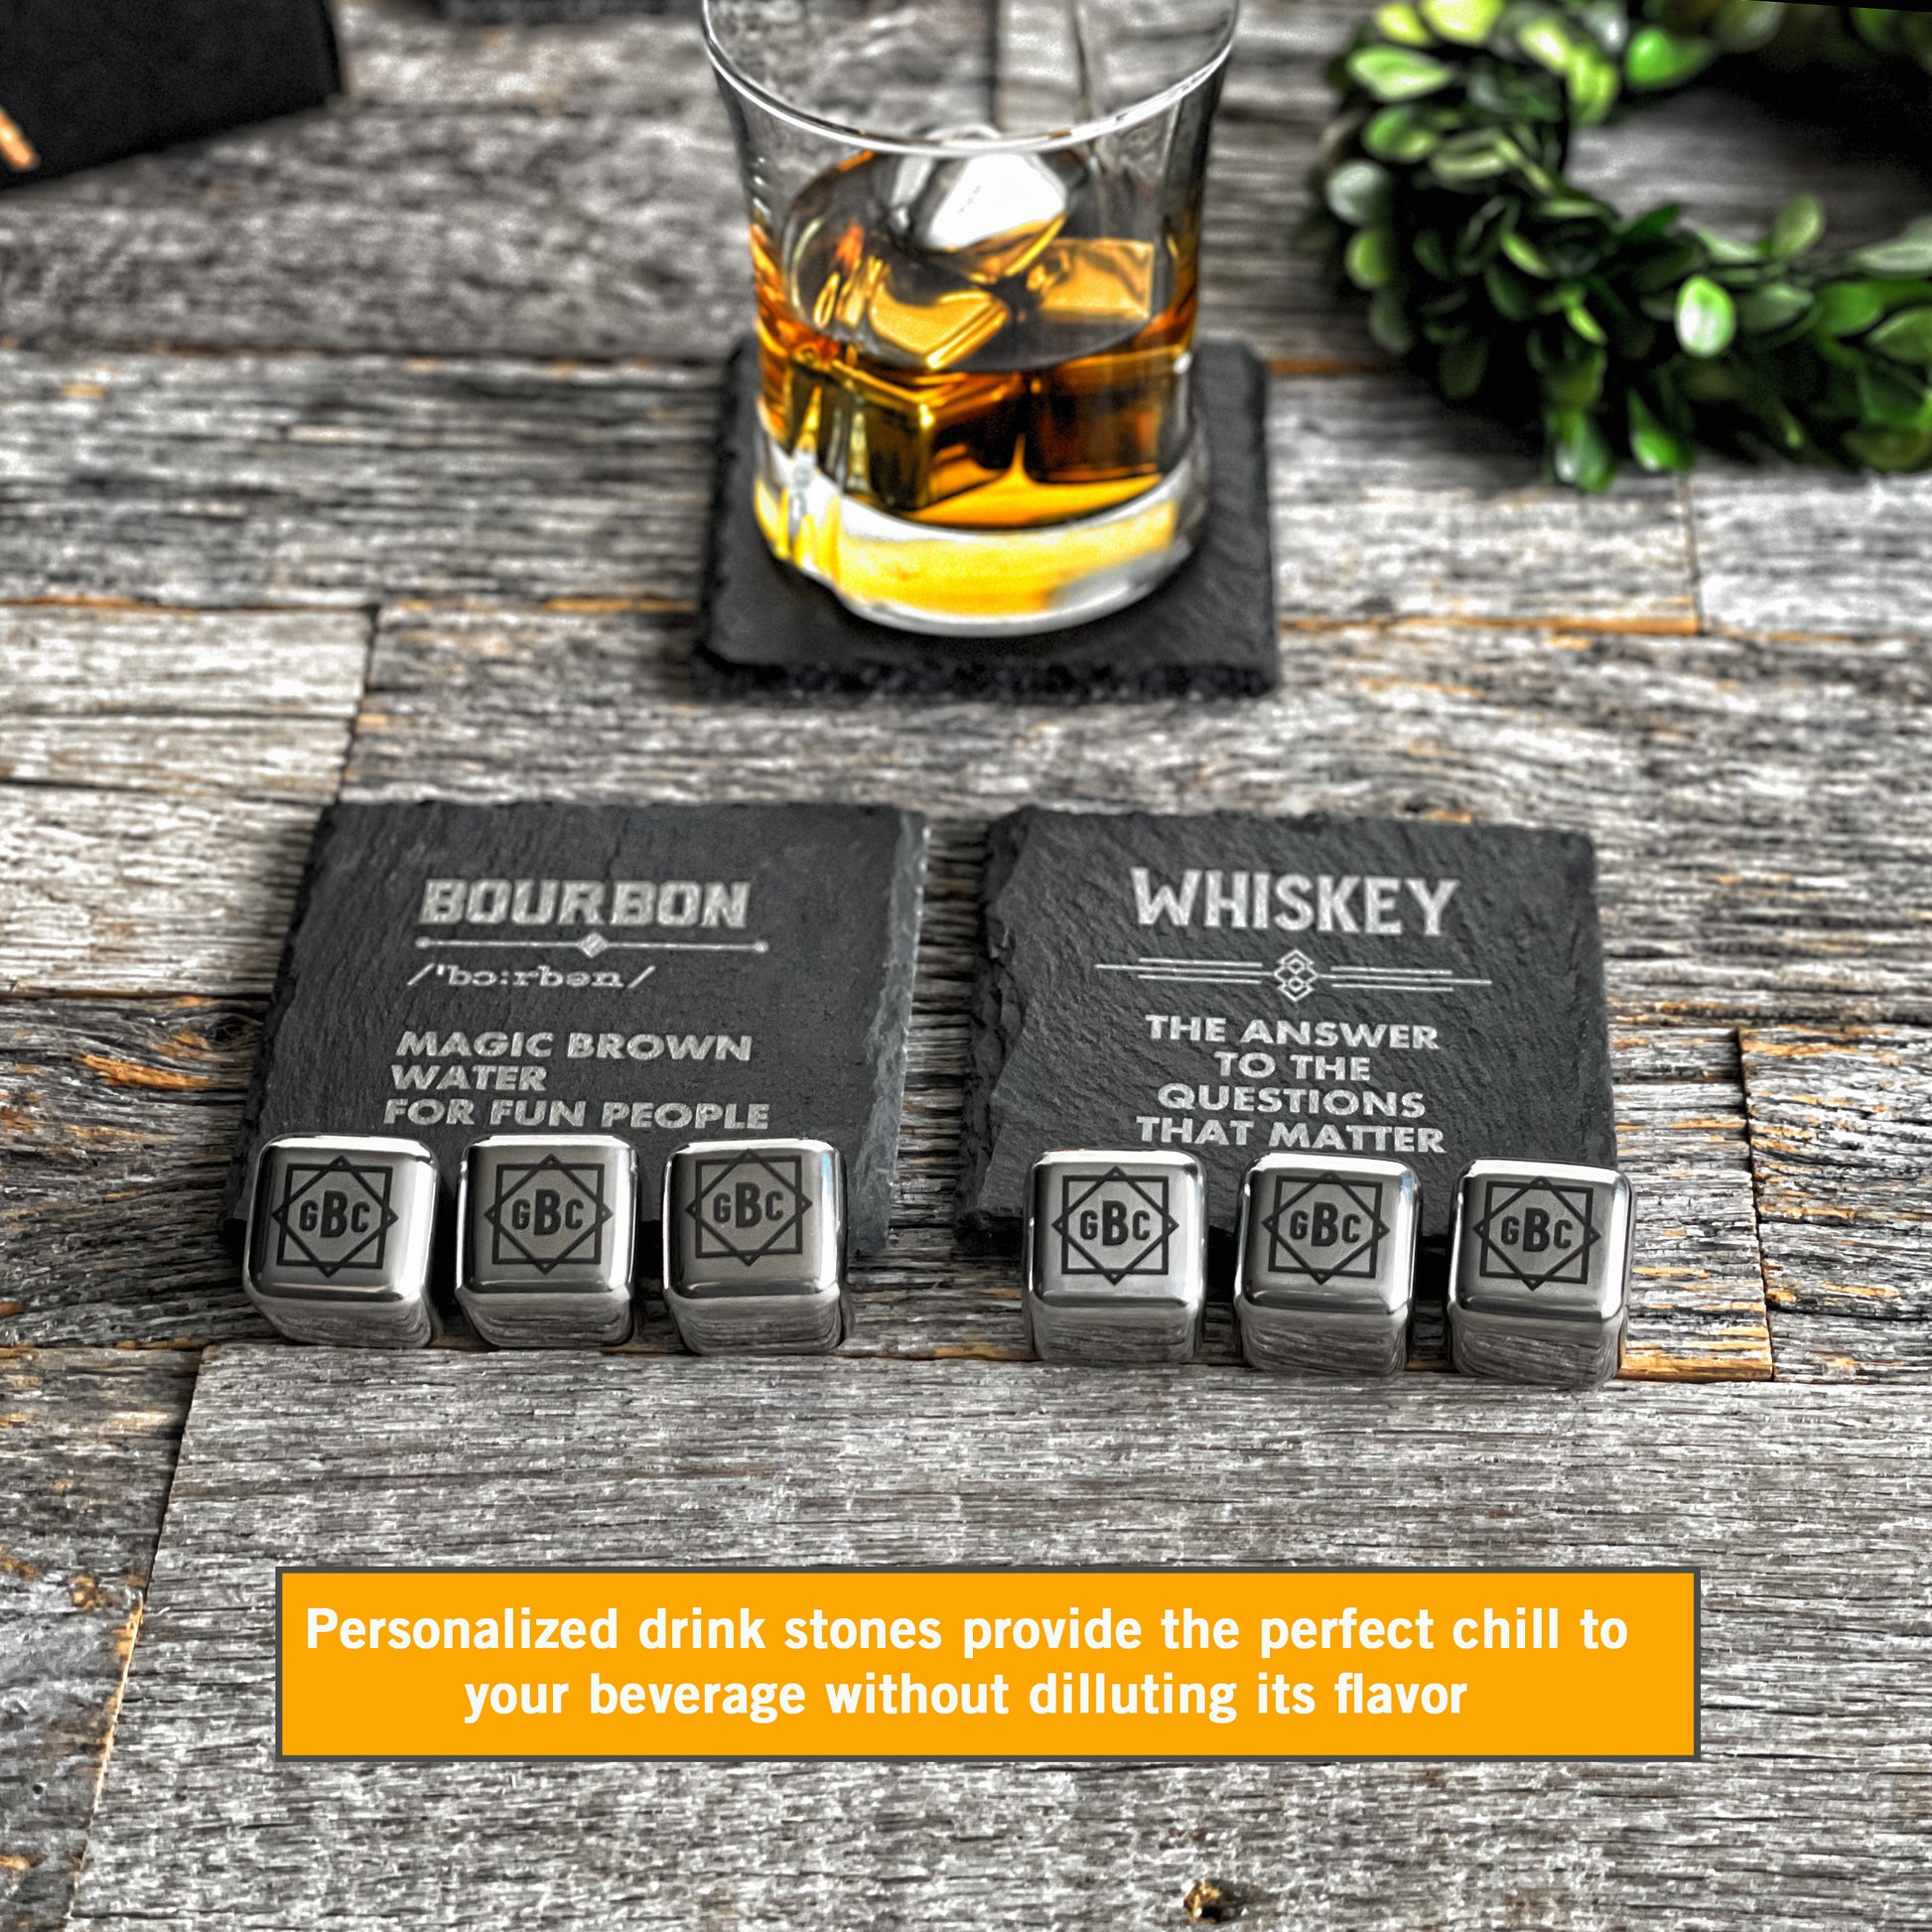 Personalized drink stones to chill your drink without diluting it